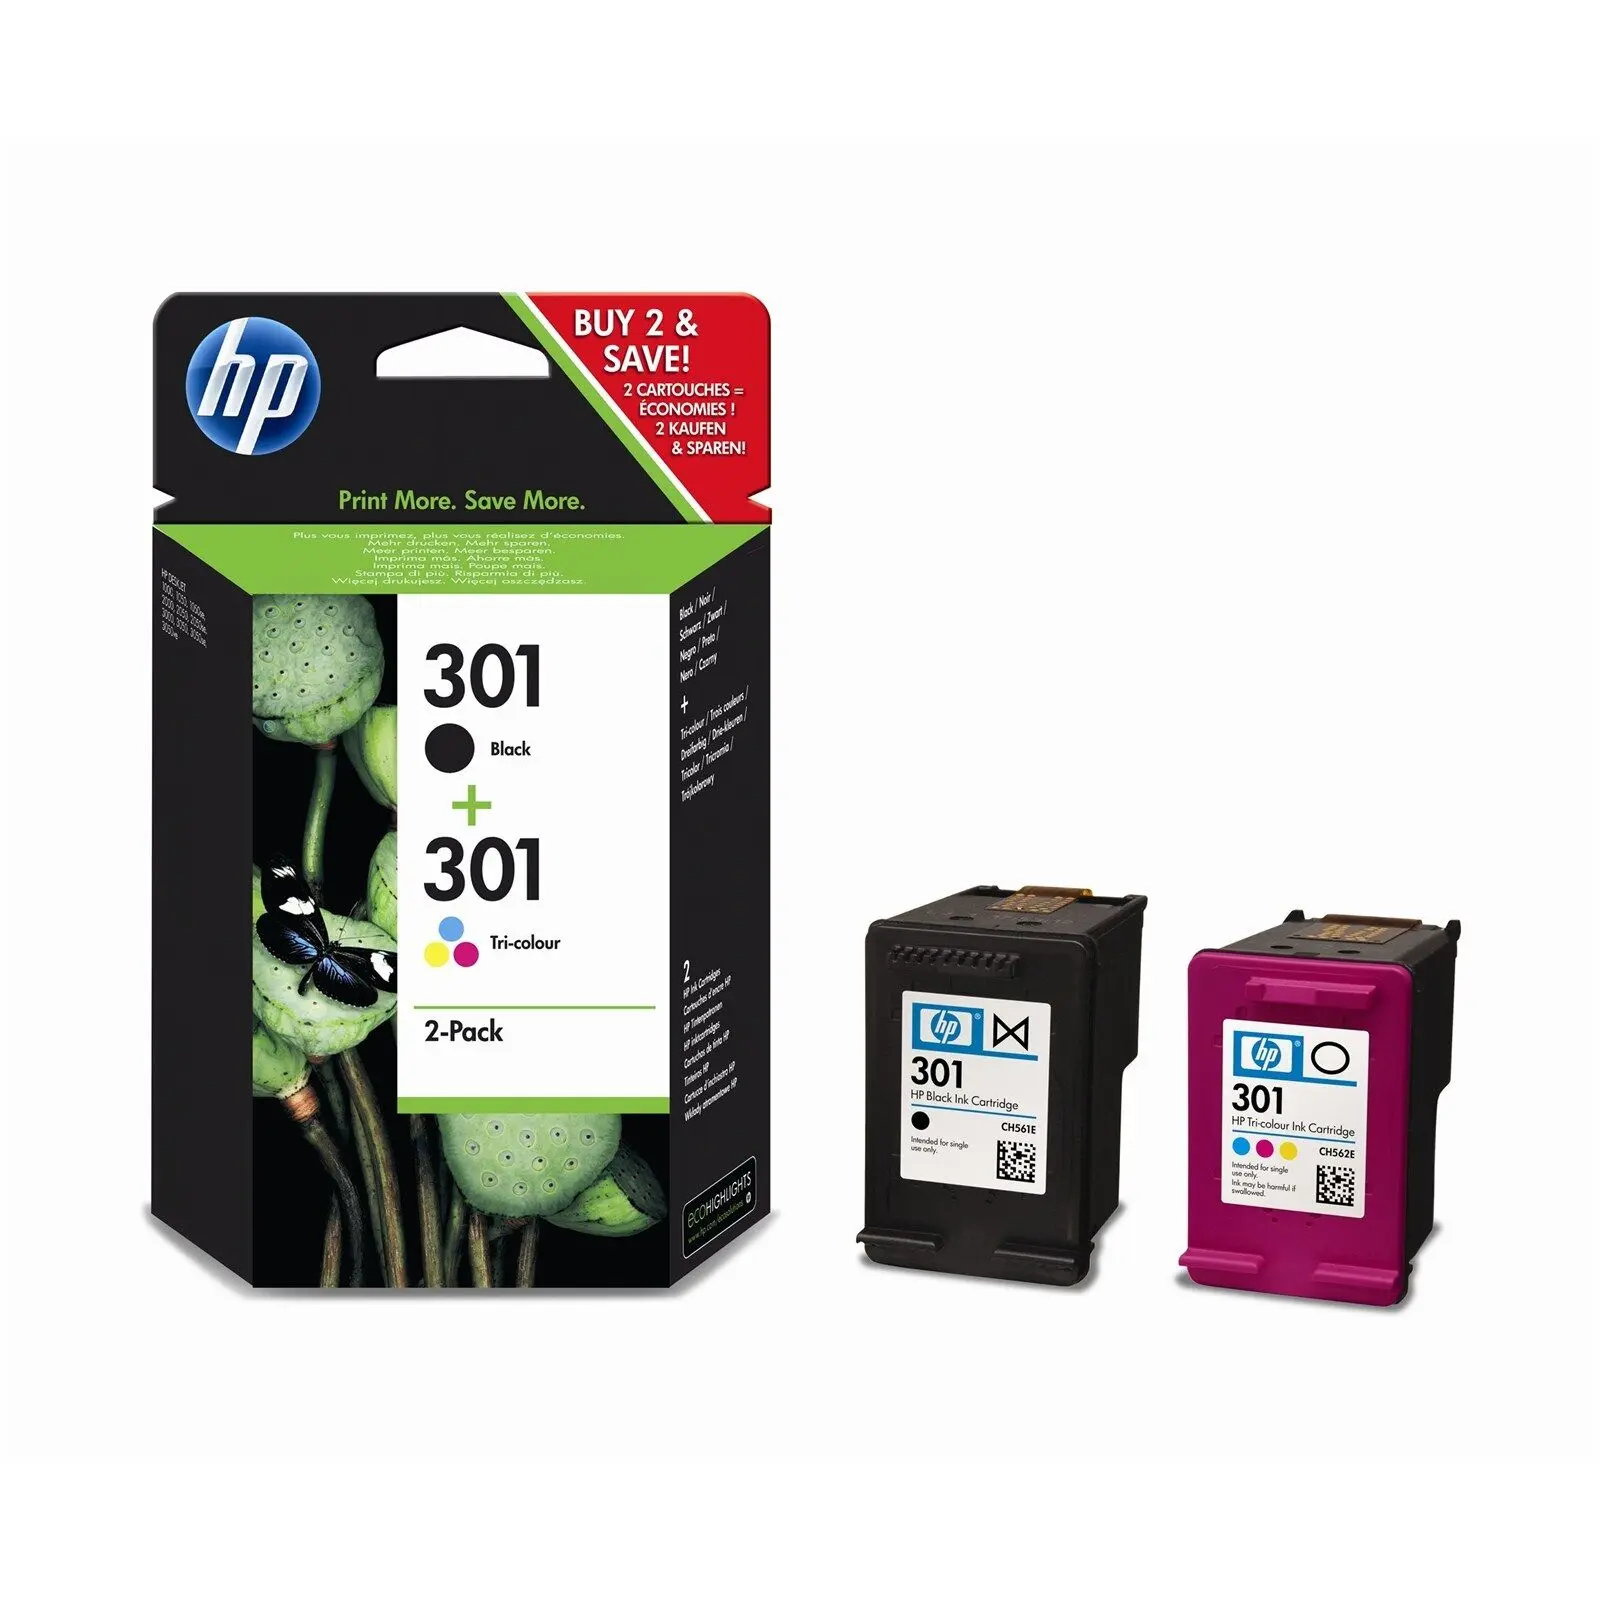 Hp ink cartridge 301: high-quality printing made easy